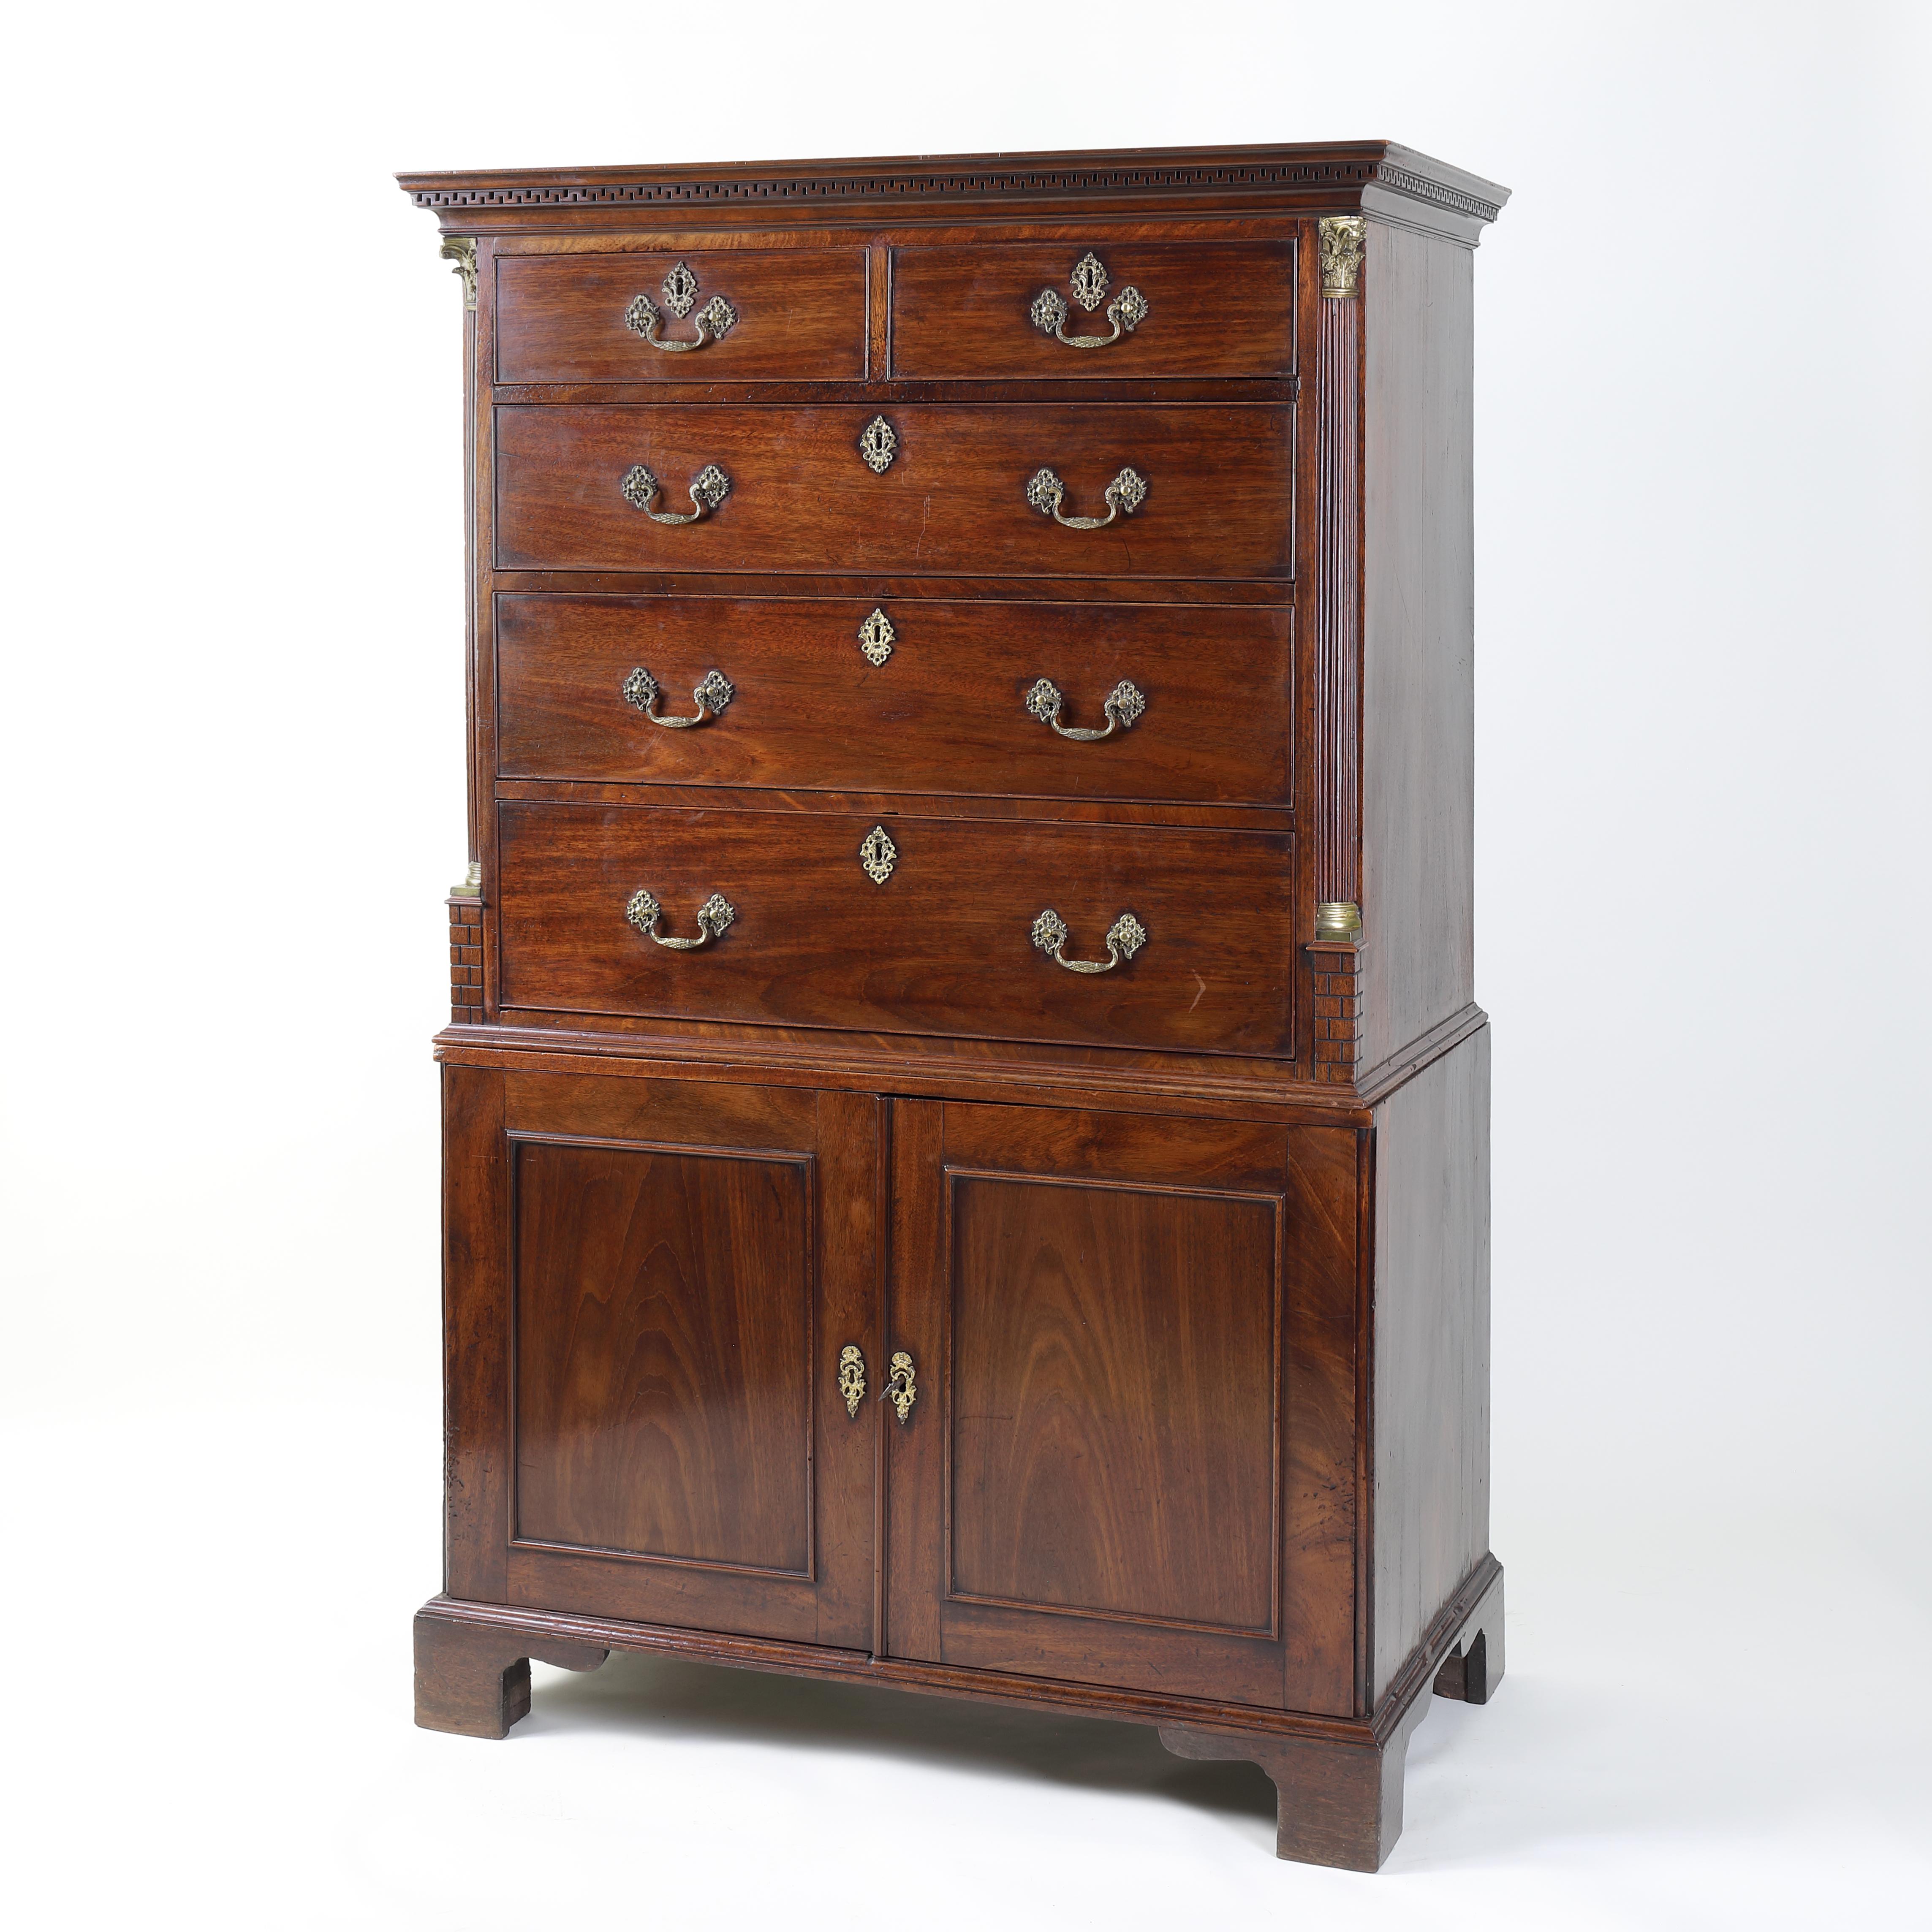 A rare and unusual small 18th century mahogany tallboy consisting of a chest of drawers above a two door linen press/cupboard. The top with dentil cornice above an arrangement of two short and three long graduated drawers flanked by quartered fluted